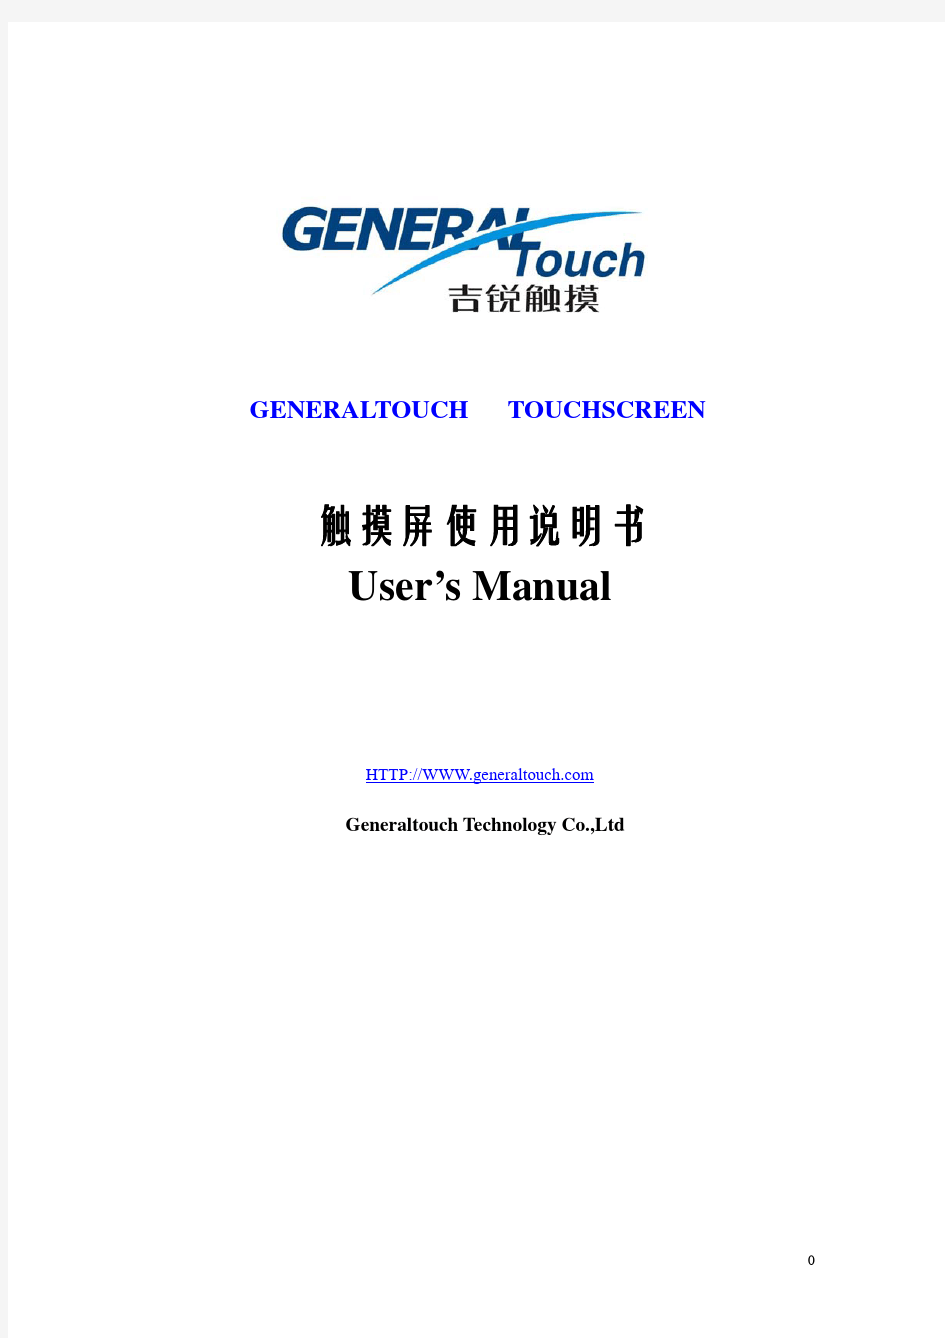 GeneralTouch触摸屏使用说明书